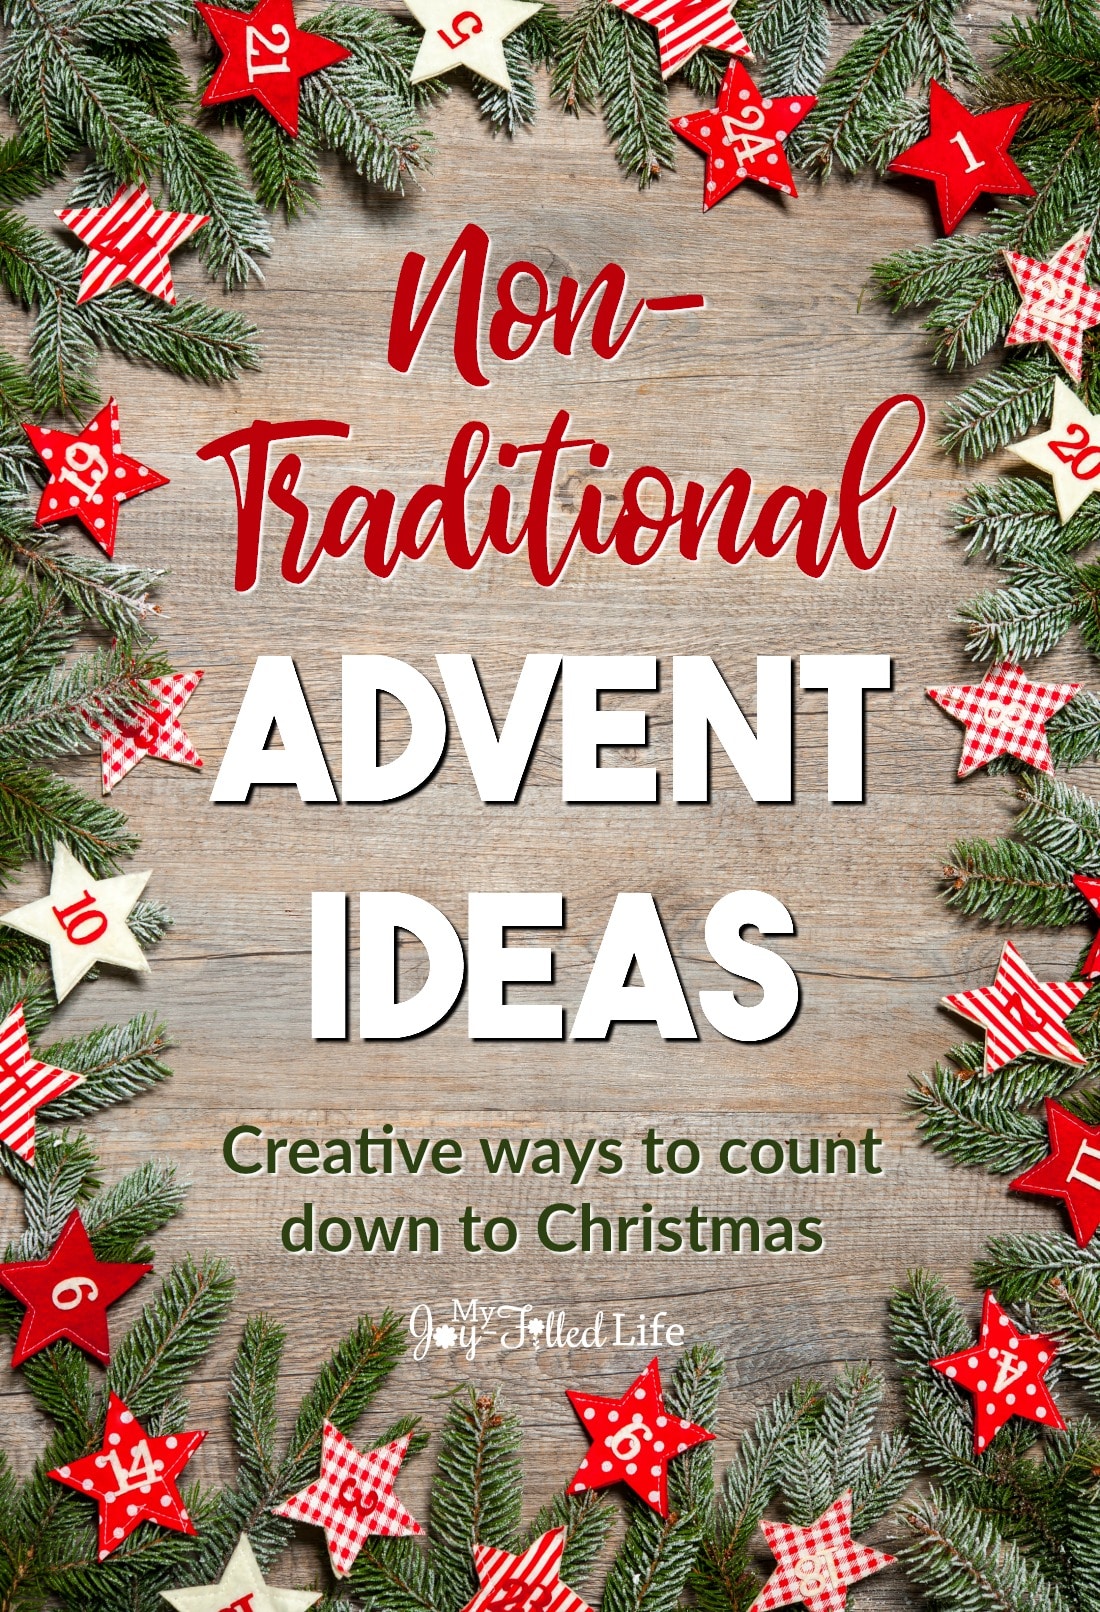 Non-Traditional Advent Ideas - a list of creative ways to count down to Christmas